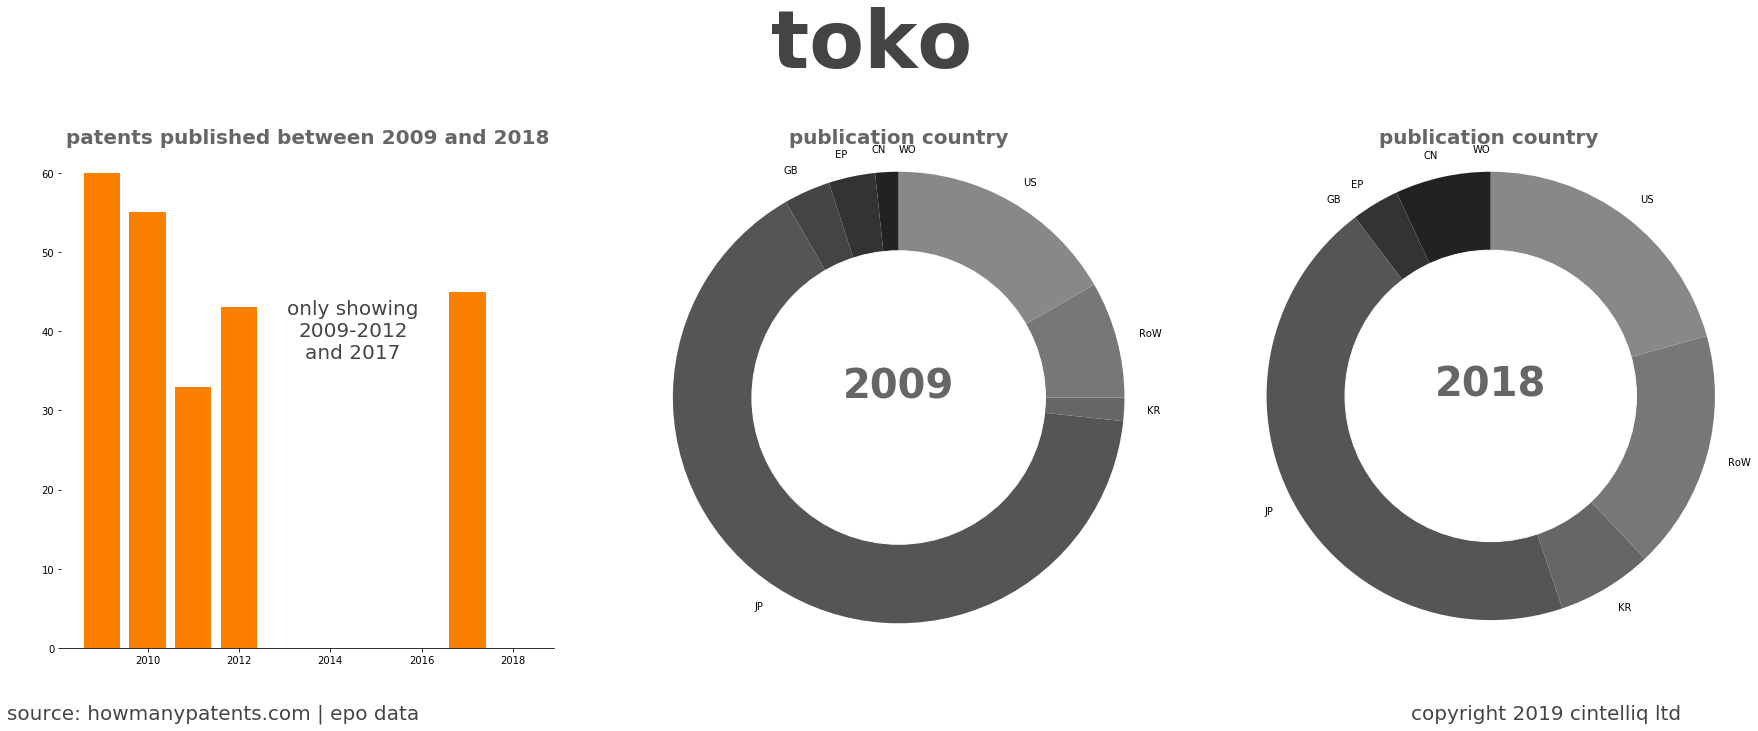 summary of patents for Toko